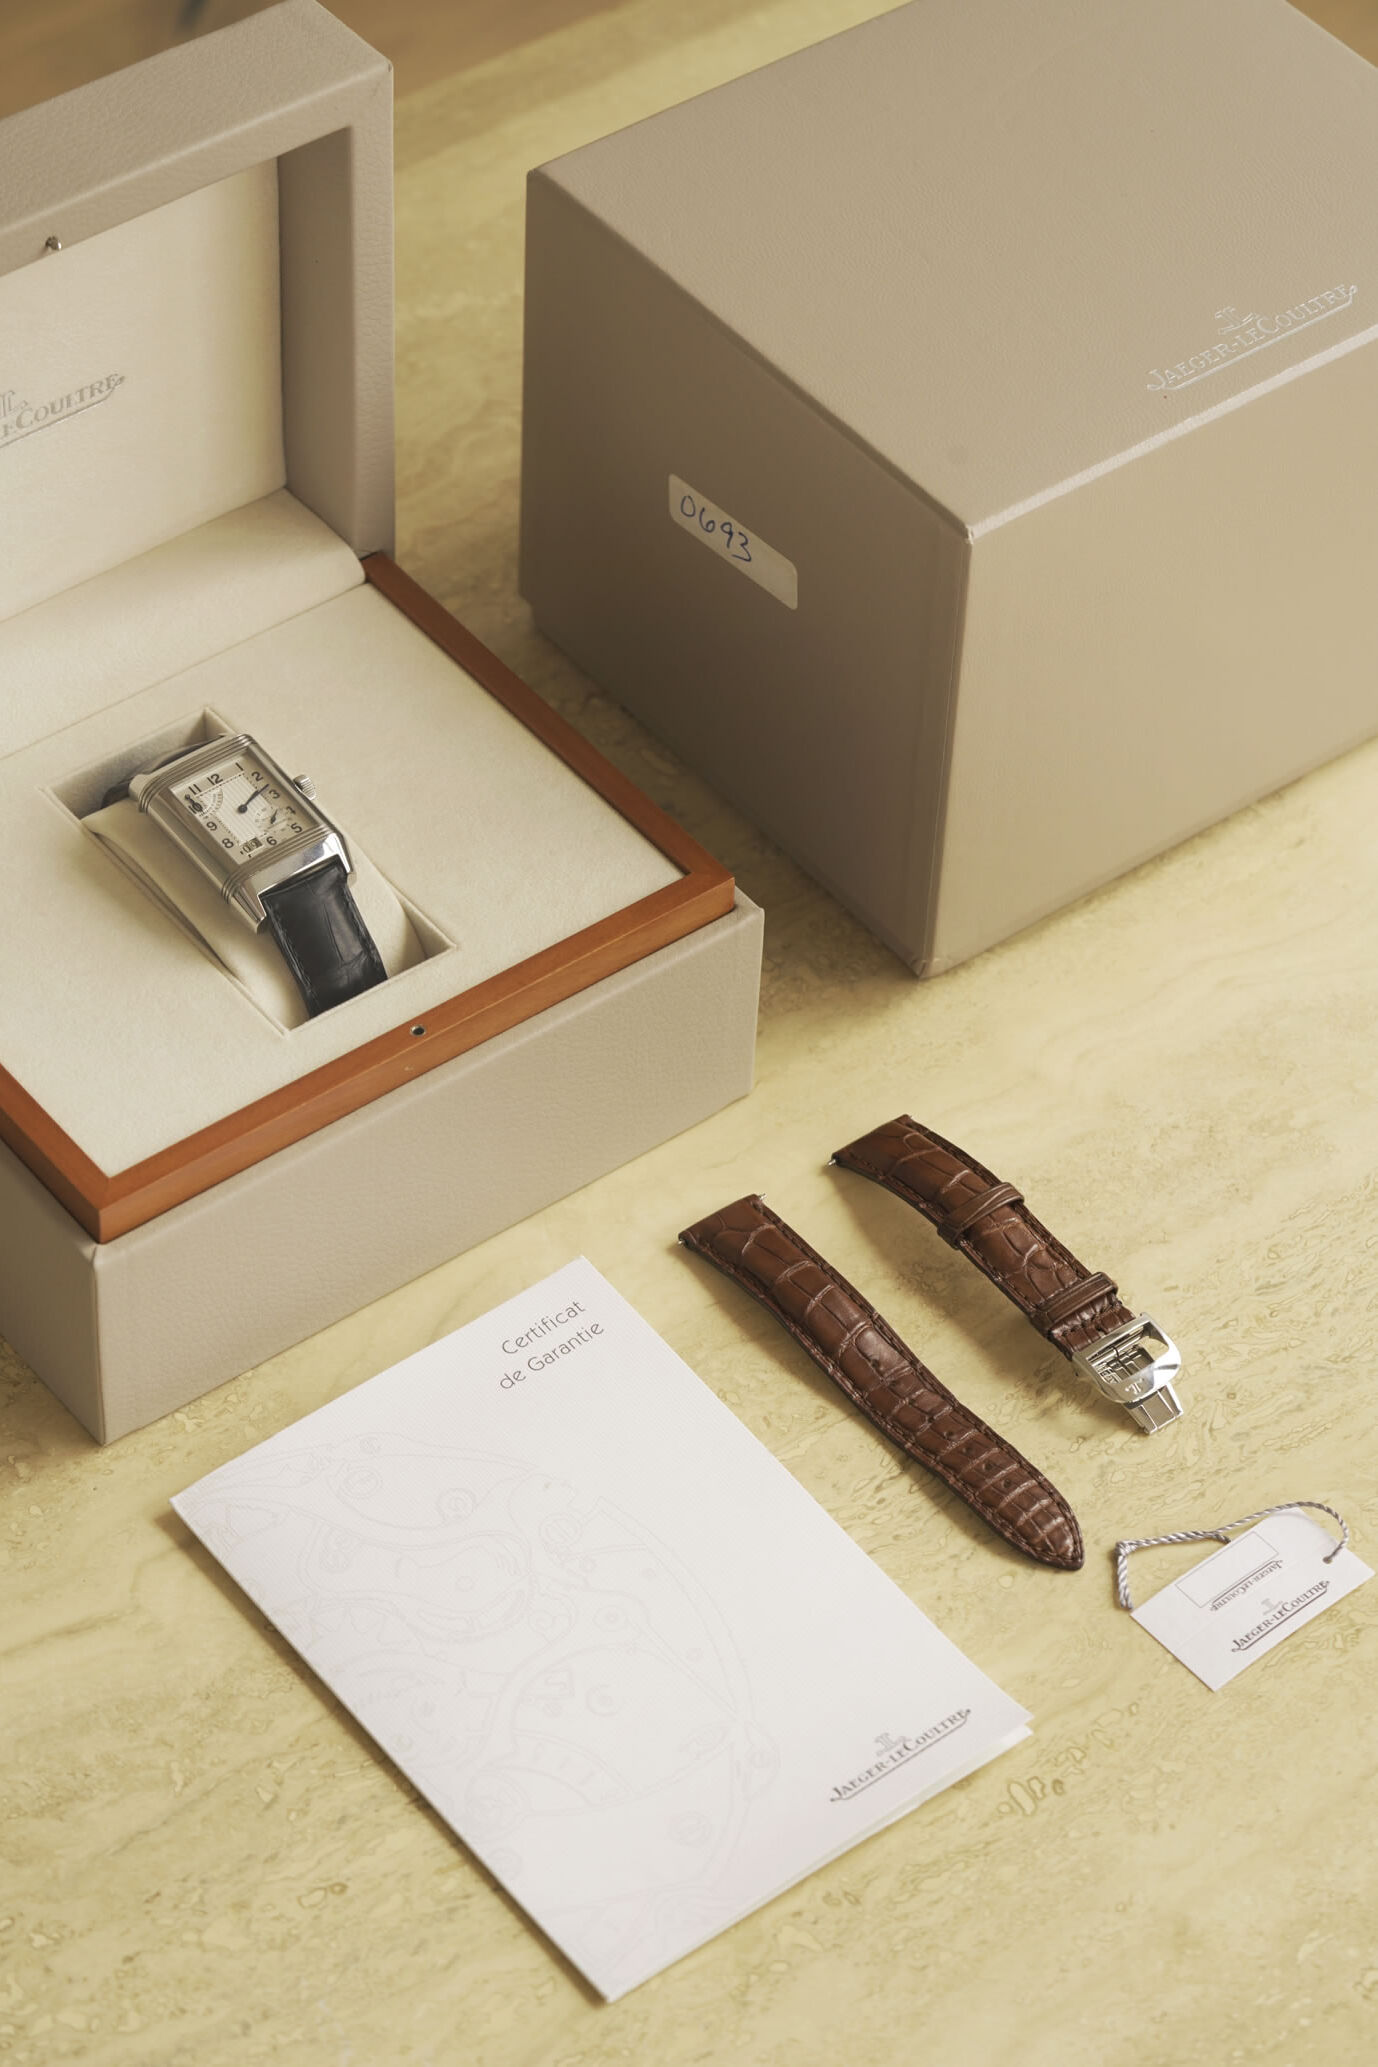 Jaeger LeCoultre Reverso 8 Days ‘Grande Date’ watch plus packaging & certificate